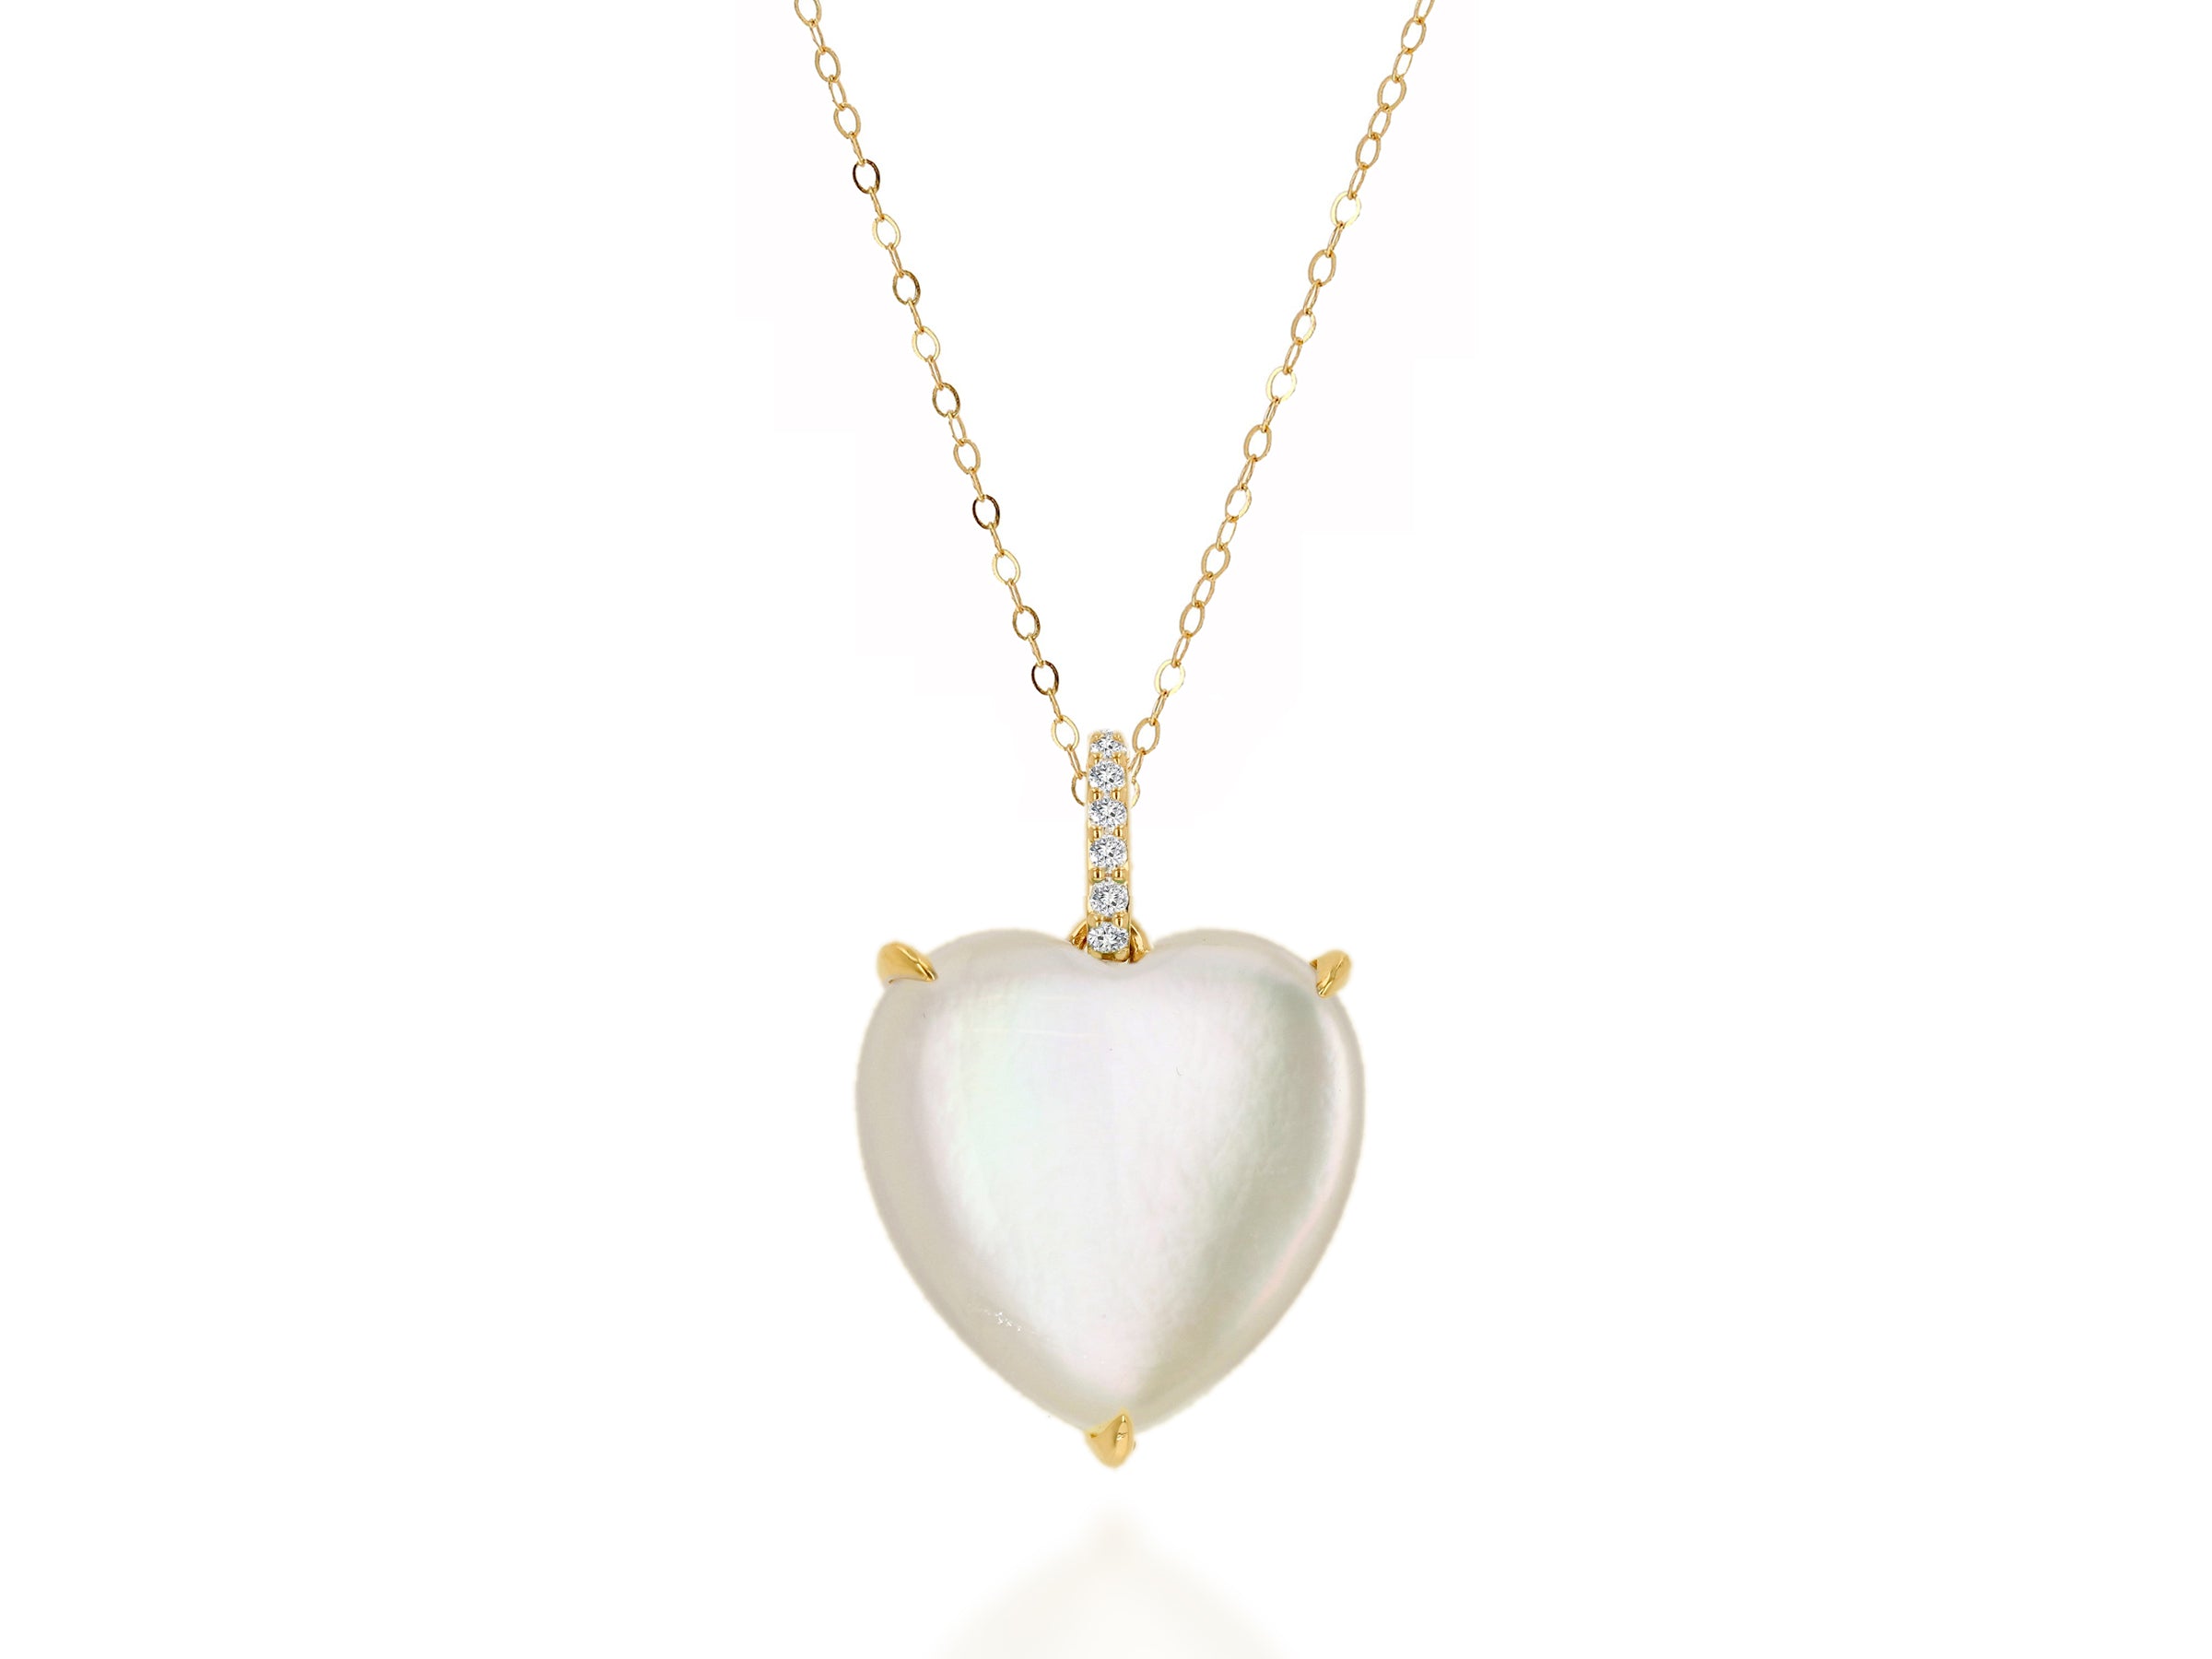 Oversized Mother of Pearl Gemstone Heart Charm